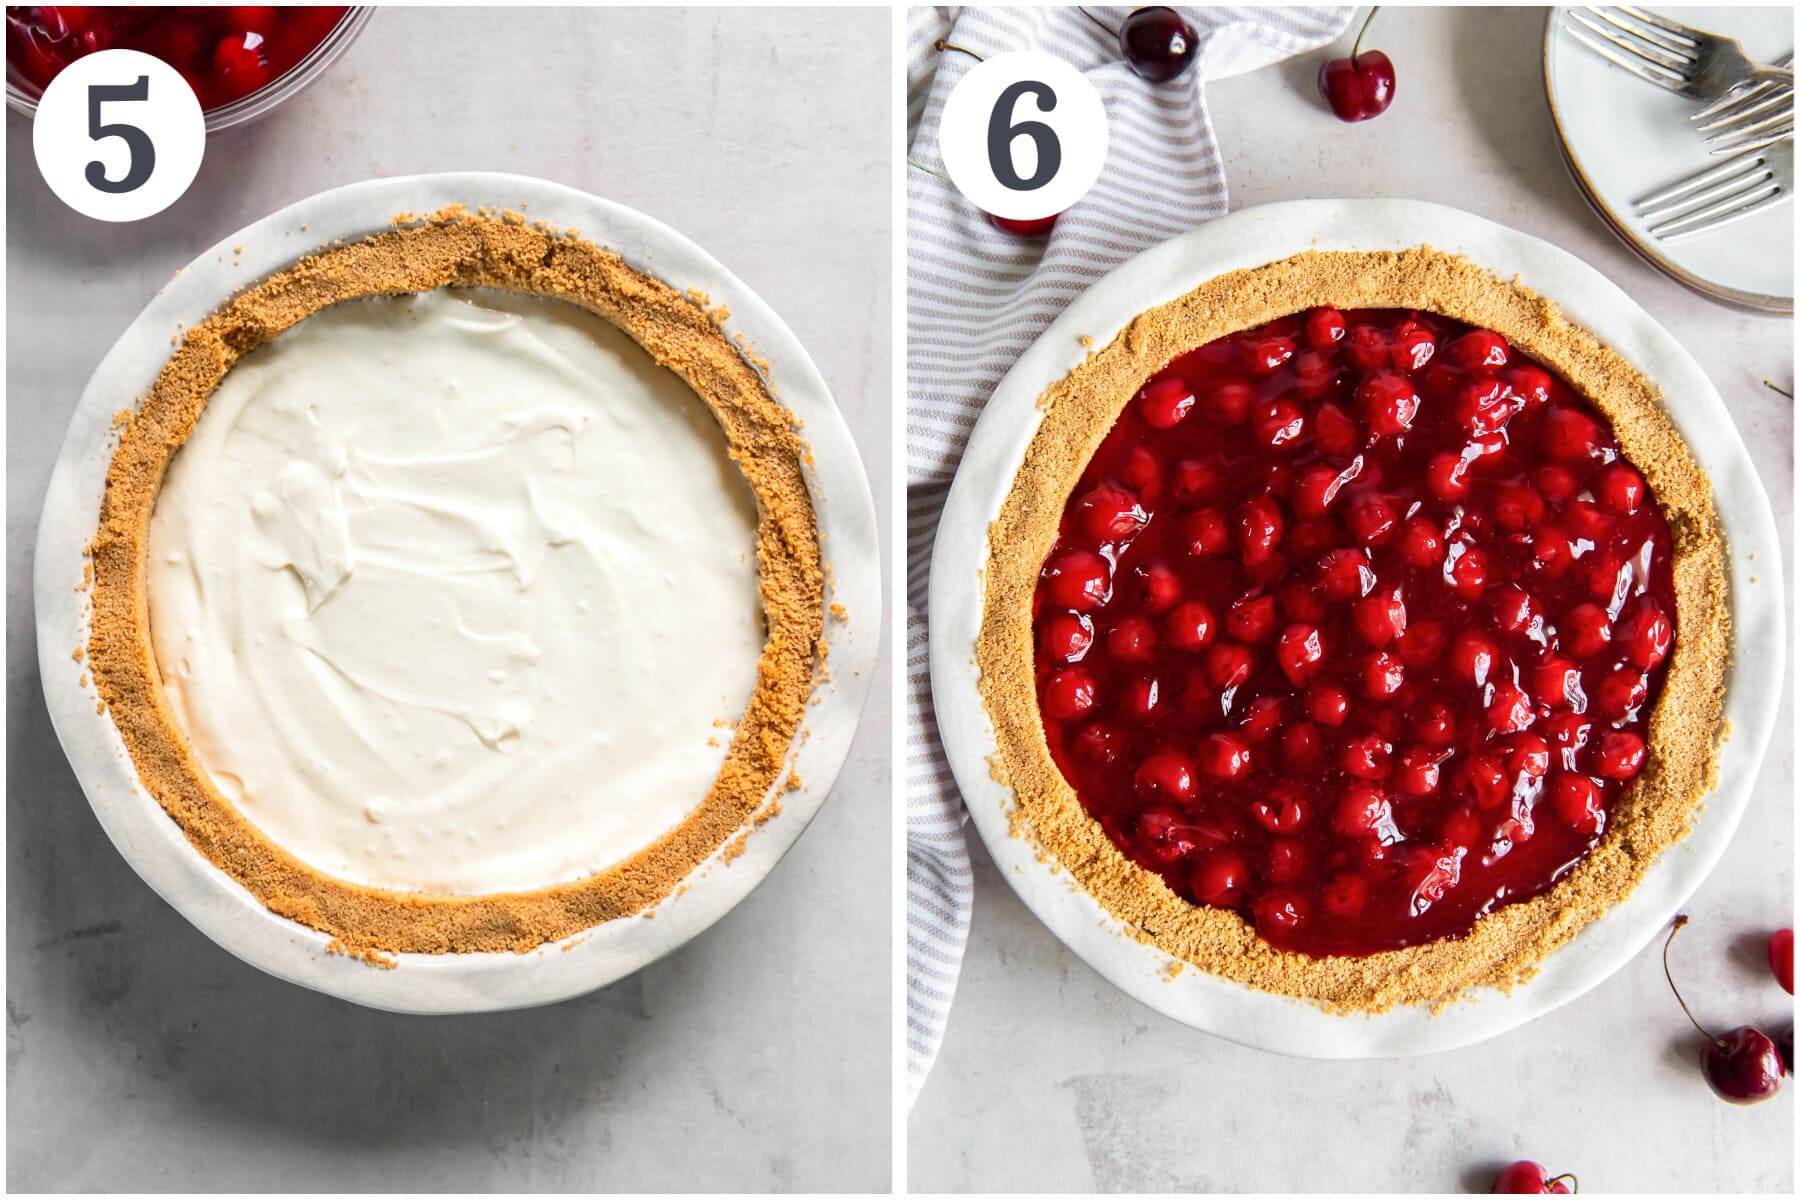 photo collage demonstrating how to assemble cherry cream cheese pie with filling and topping.